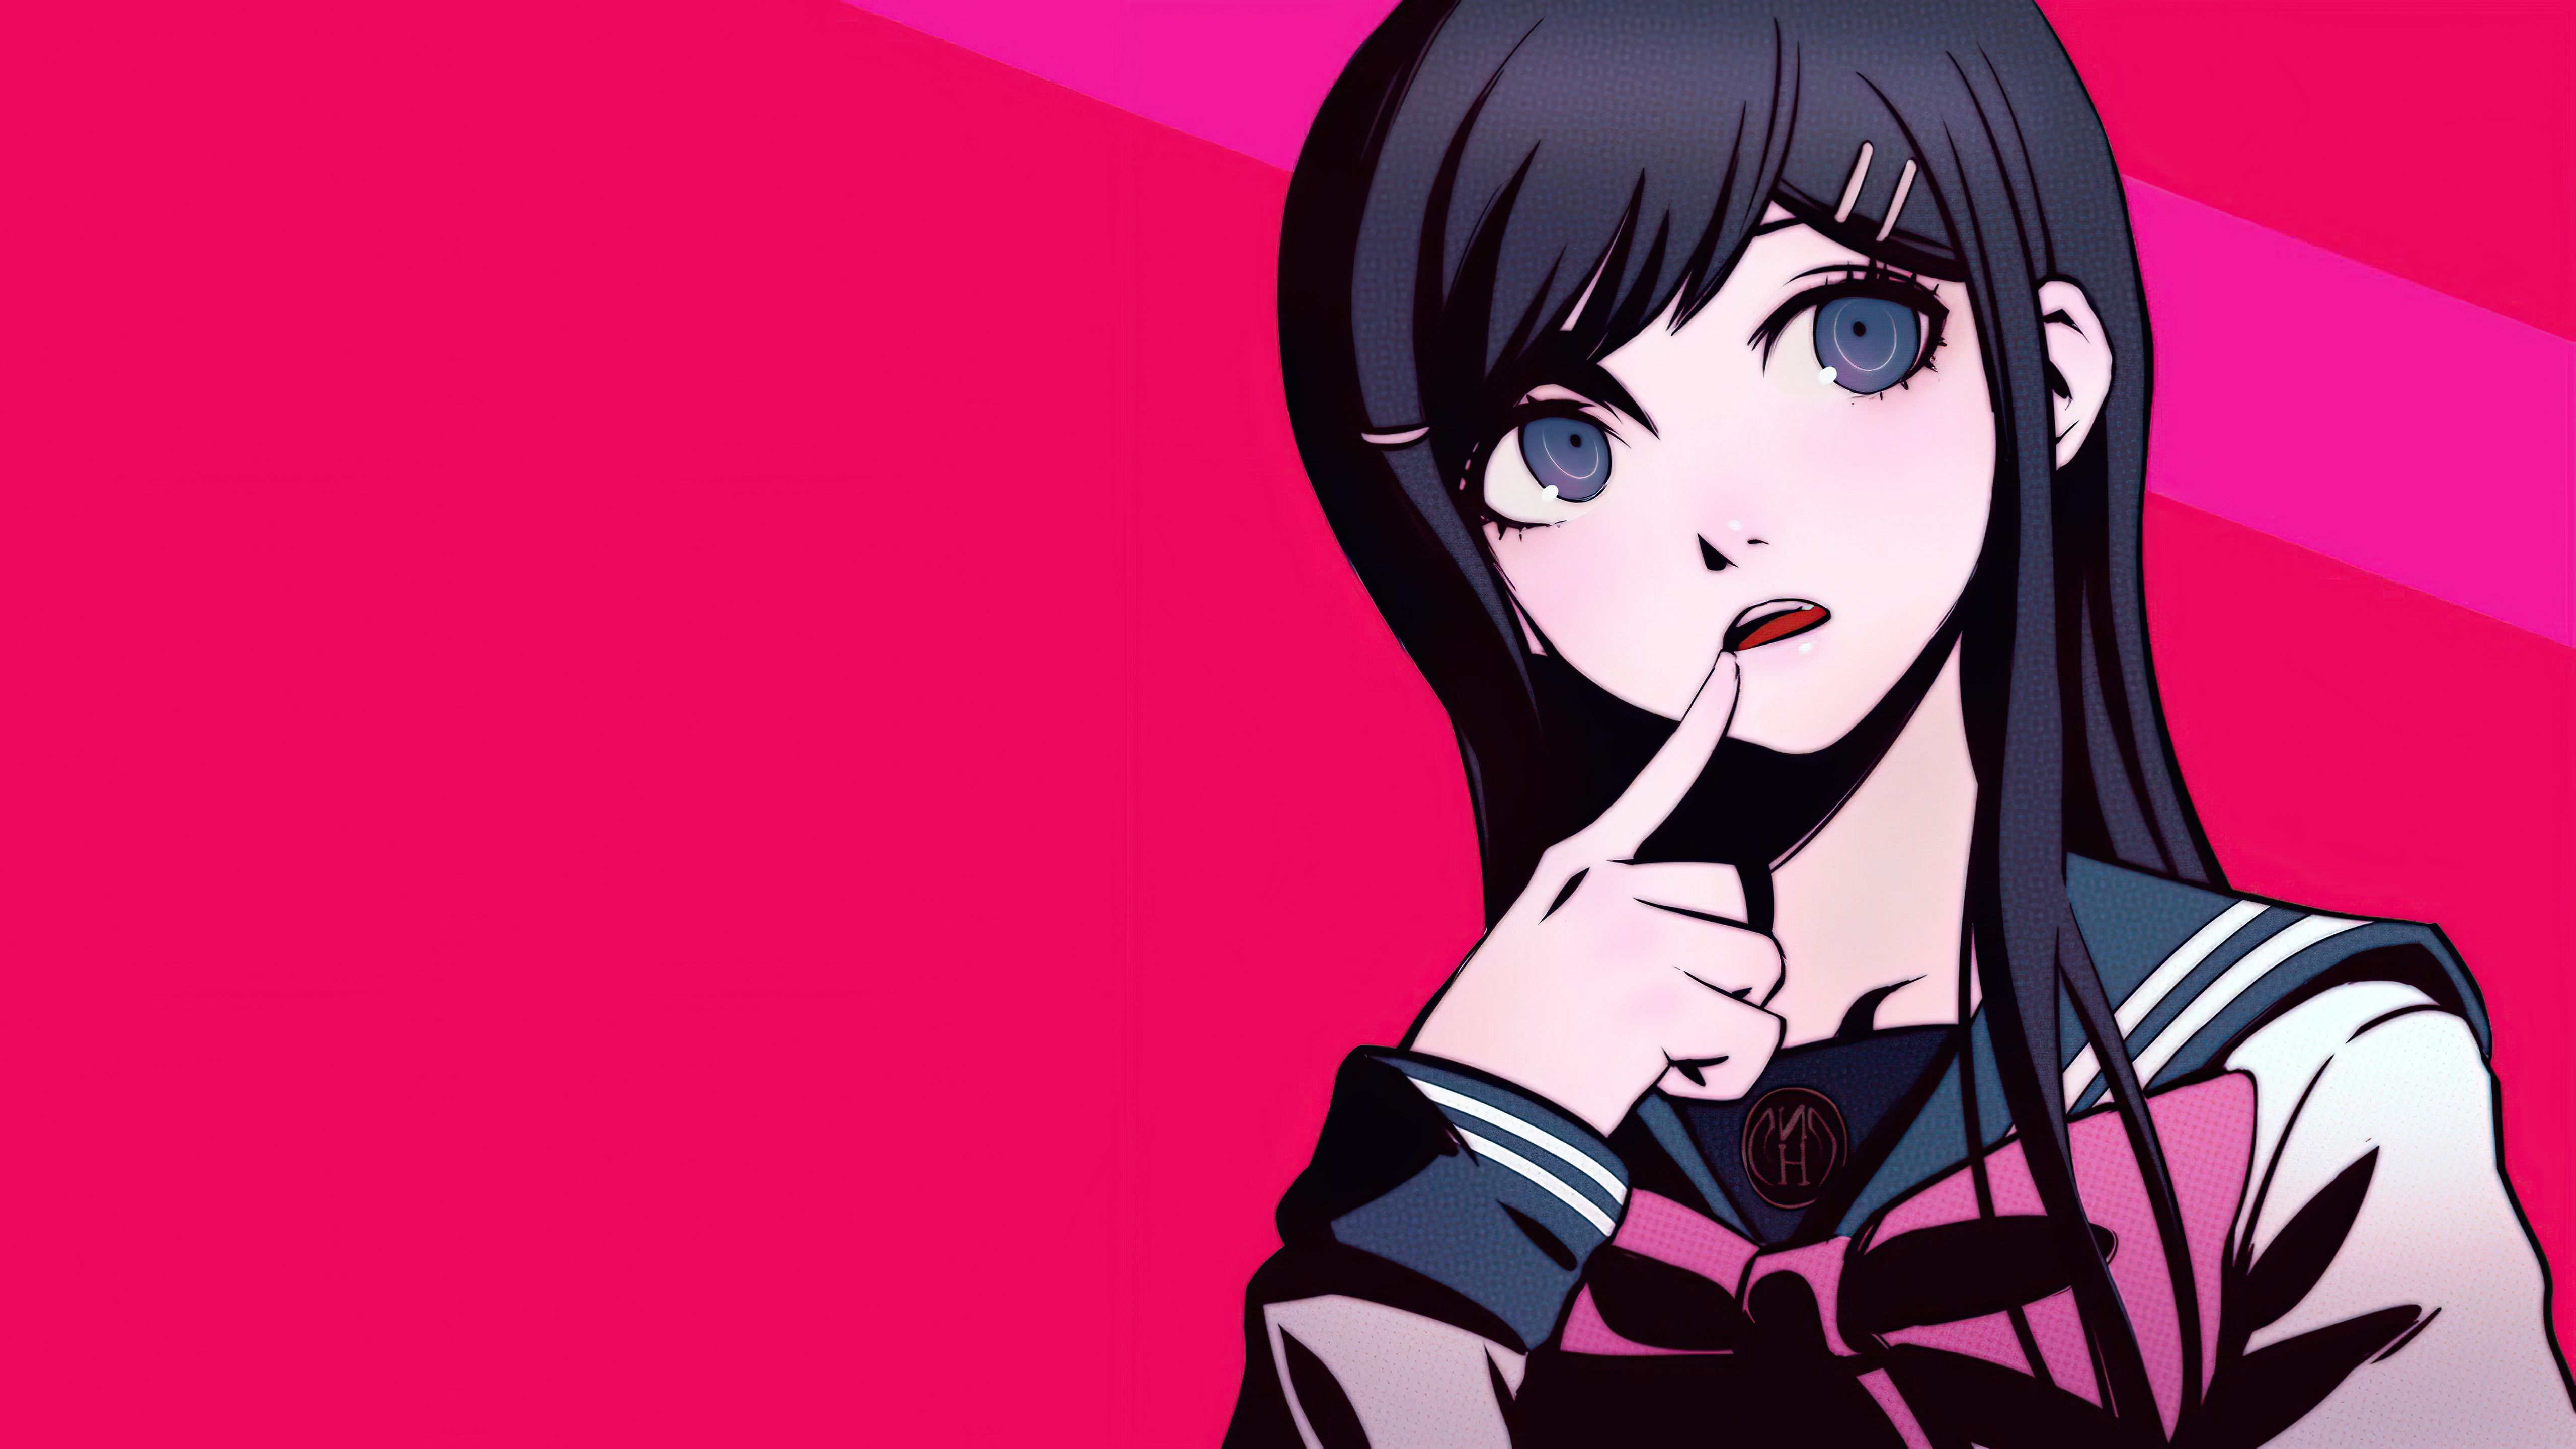 A girl with black hair and blue eyes - Danganronpa